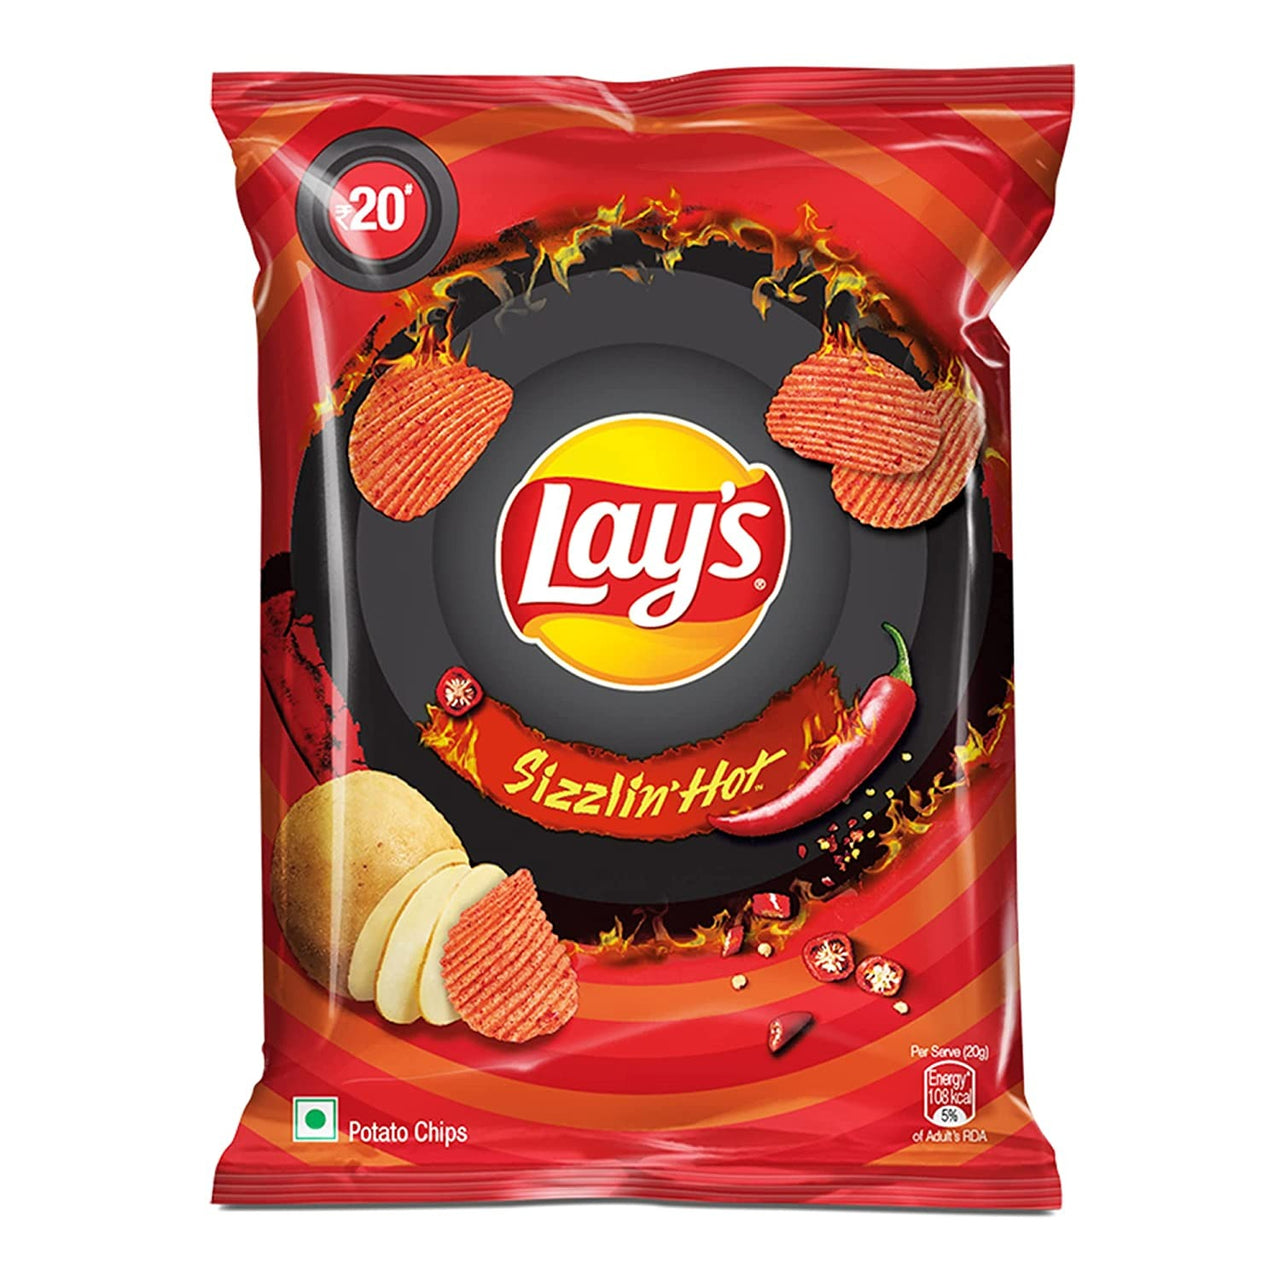 Lays Sizzling Hot